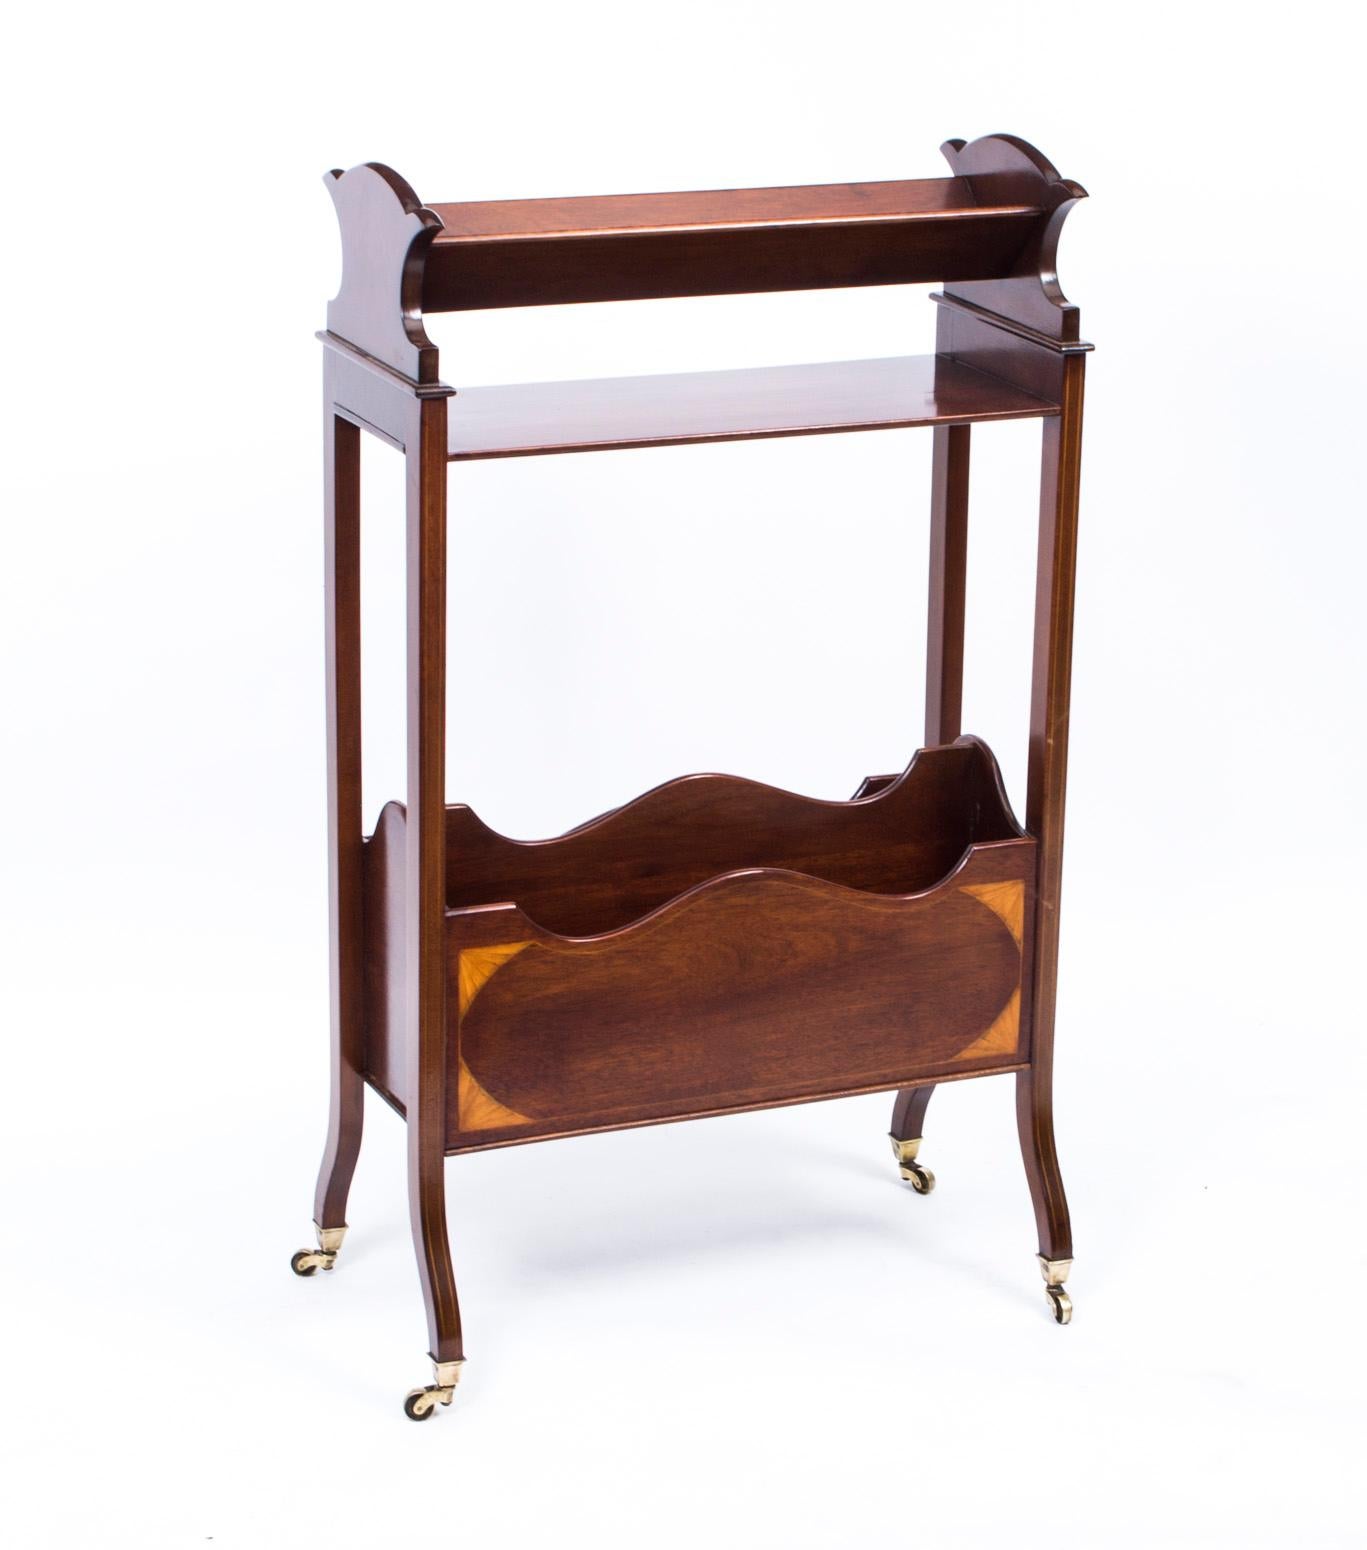 This is an elegant Edwardian bookstand, circa 1900, made from mahogany with fan inlaid decoration and boxwood stringing.

Perfect for keeping your books and magazines close to hand.

THE BOTANICAL NAME FOR THE MAHOGANY THIS ITEM IS MADE OF IS